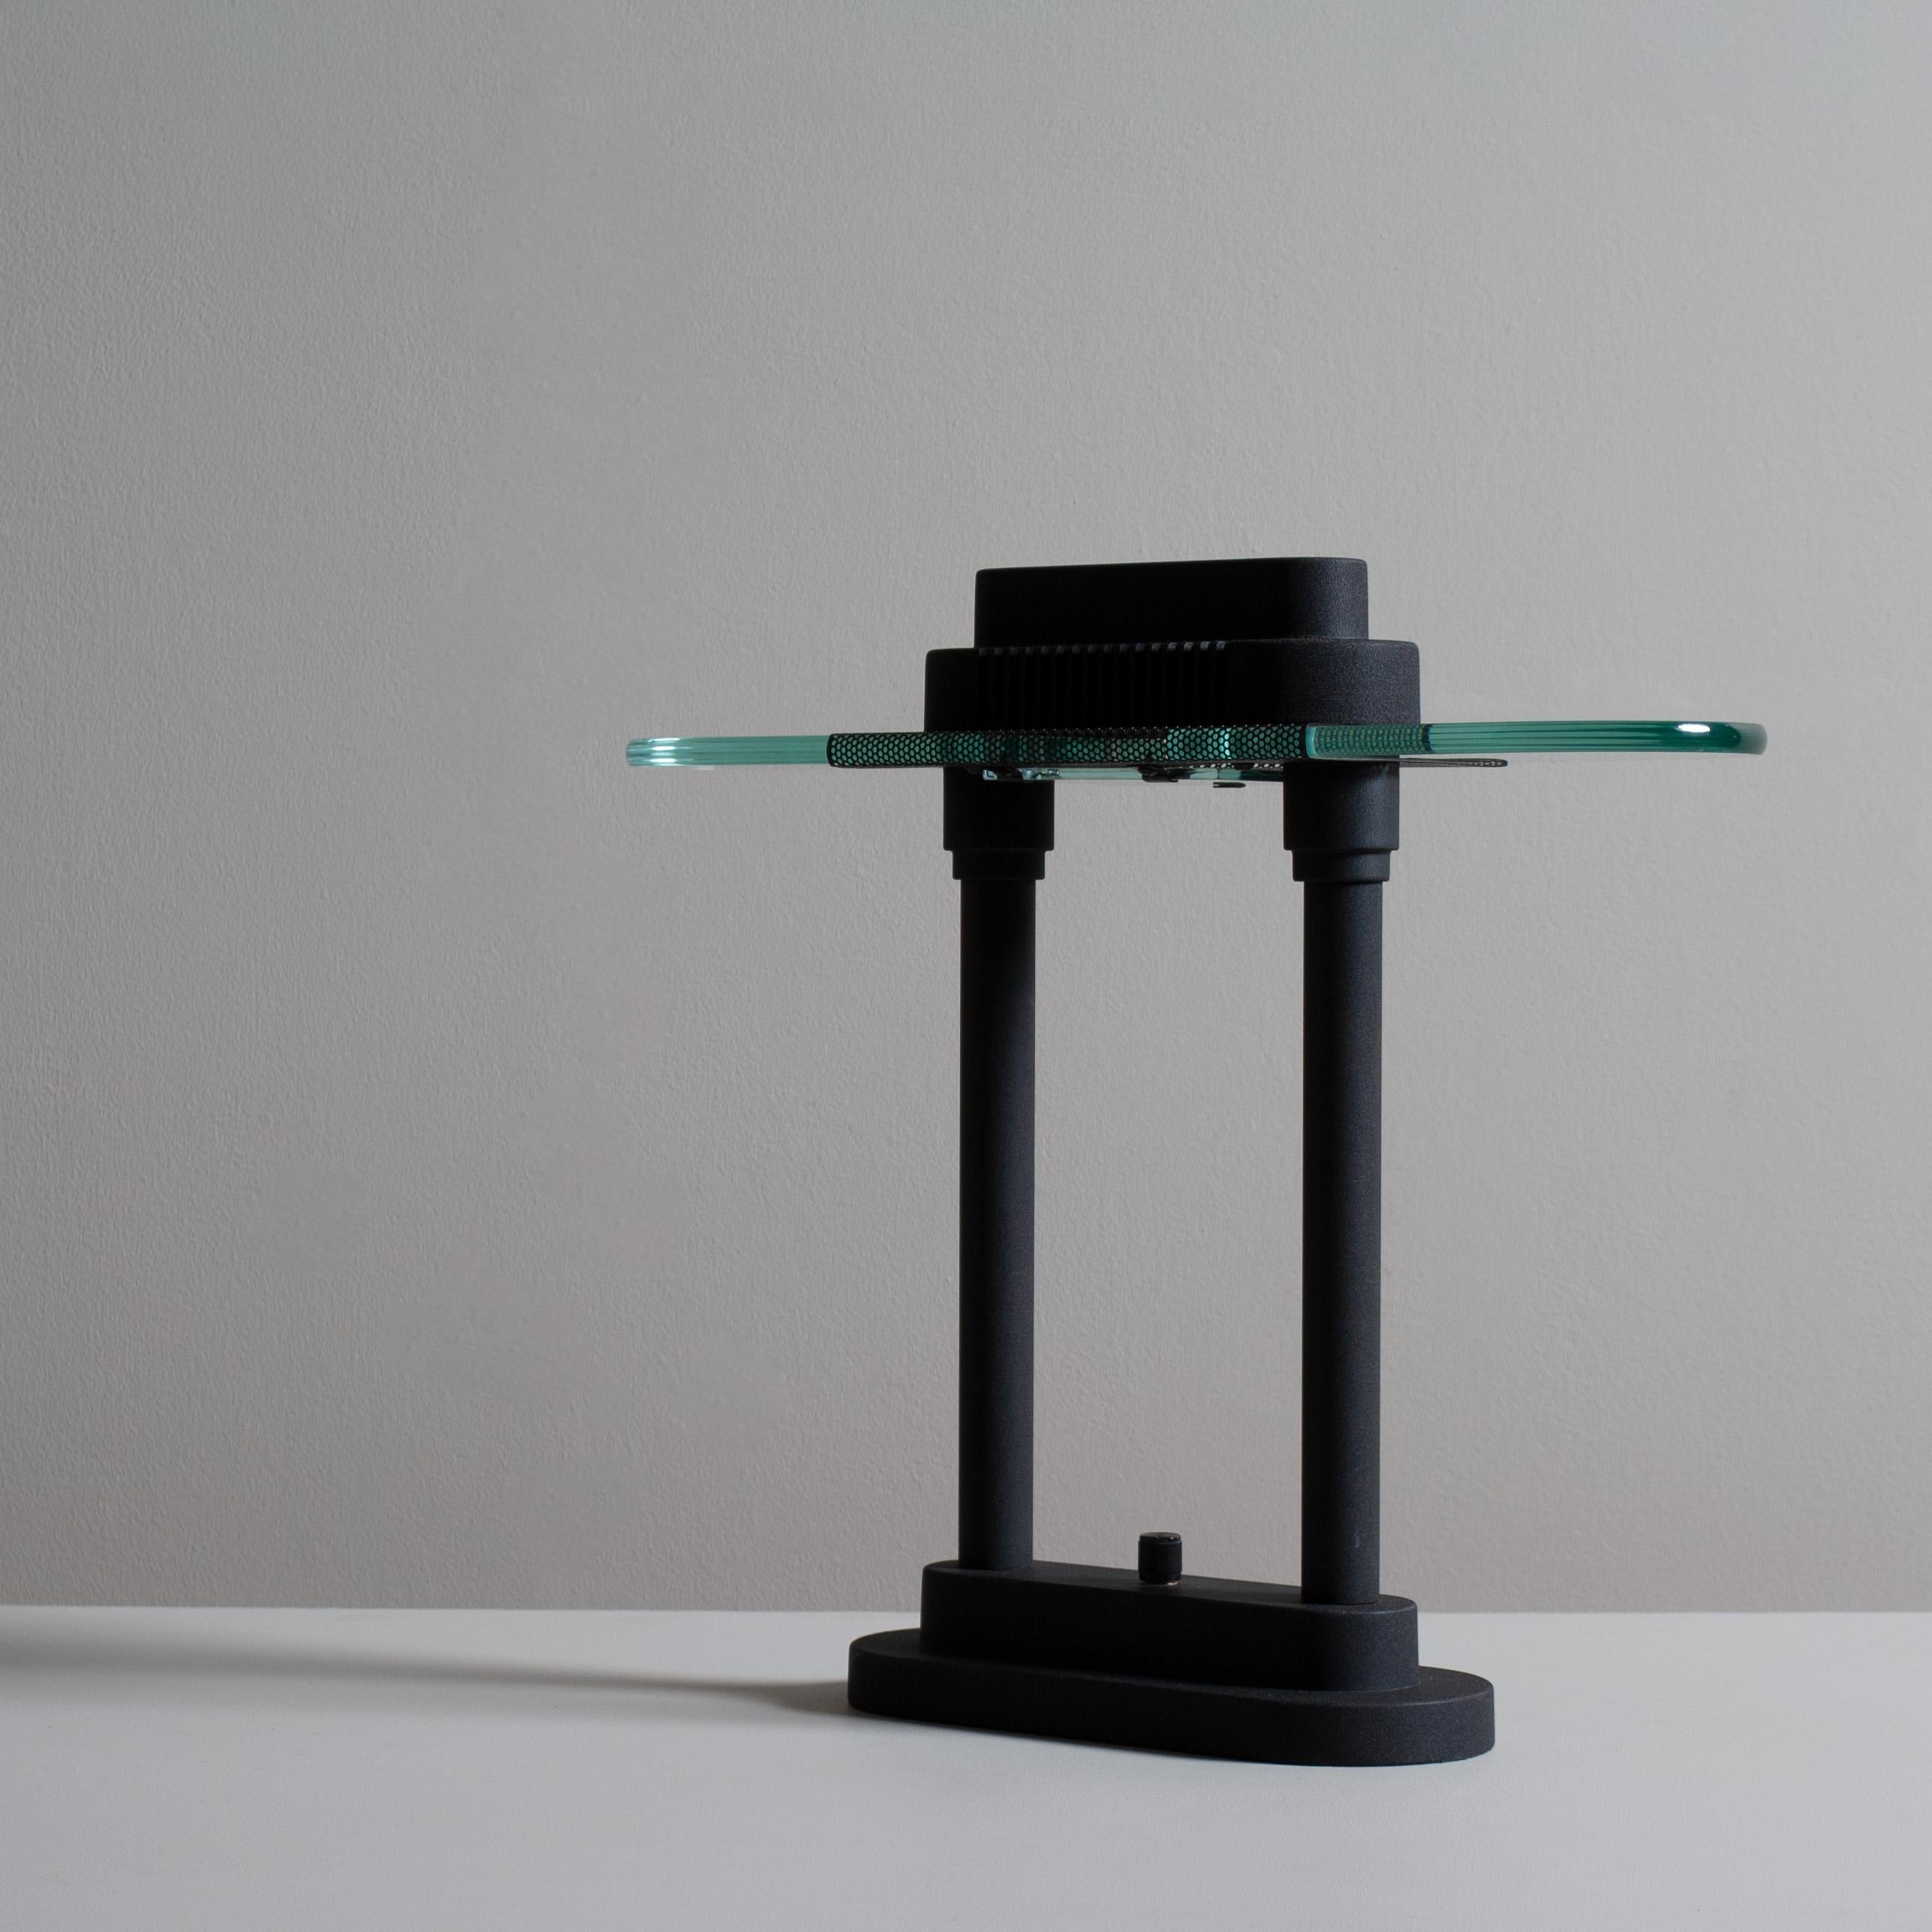 A lovely example of Robert Sonneman Memphis design table/desk lamp. Matte black finish with thick glass top diffuser. Dimmable switch. Wonderful architectural design.